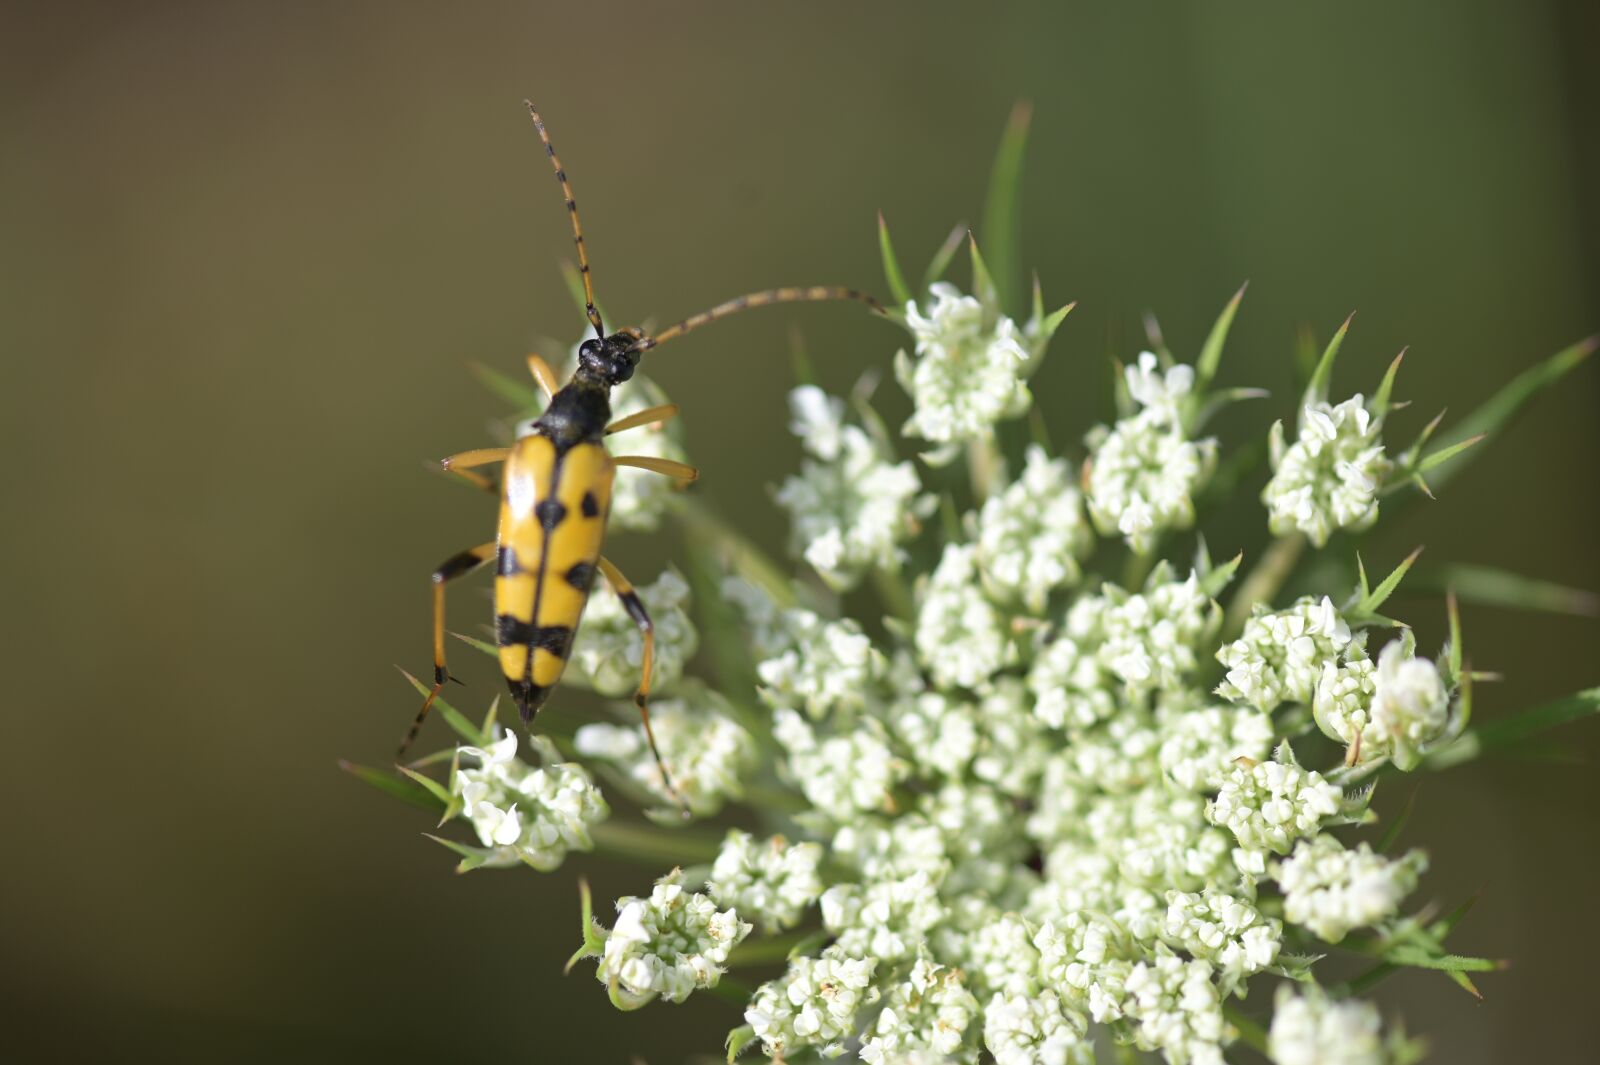 Nikon Z6 sample photo. Beetle, insect, flowers photography